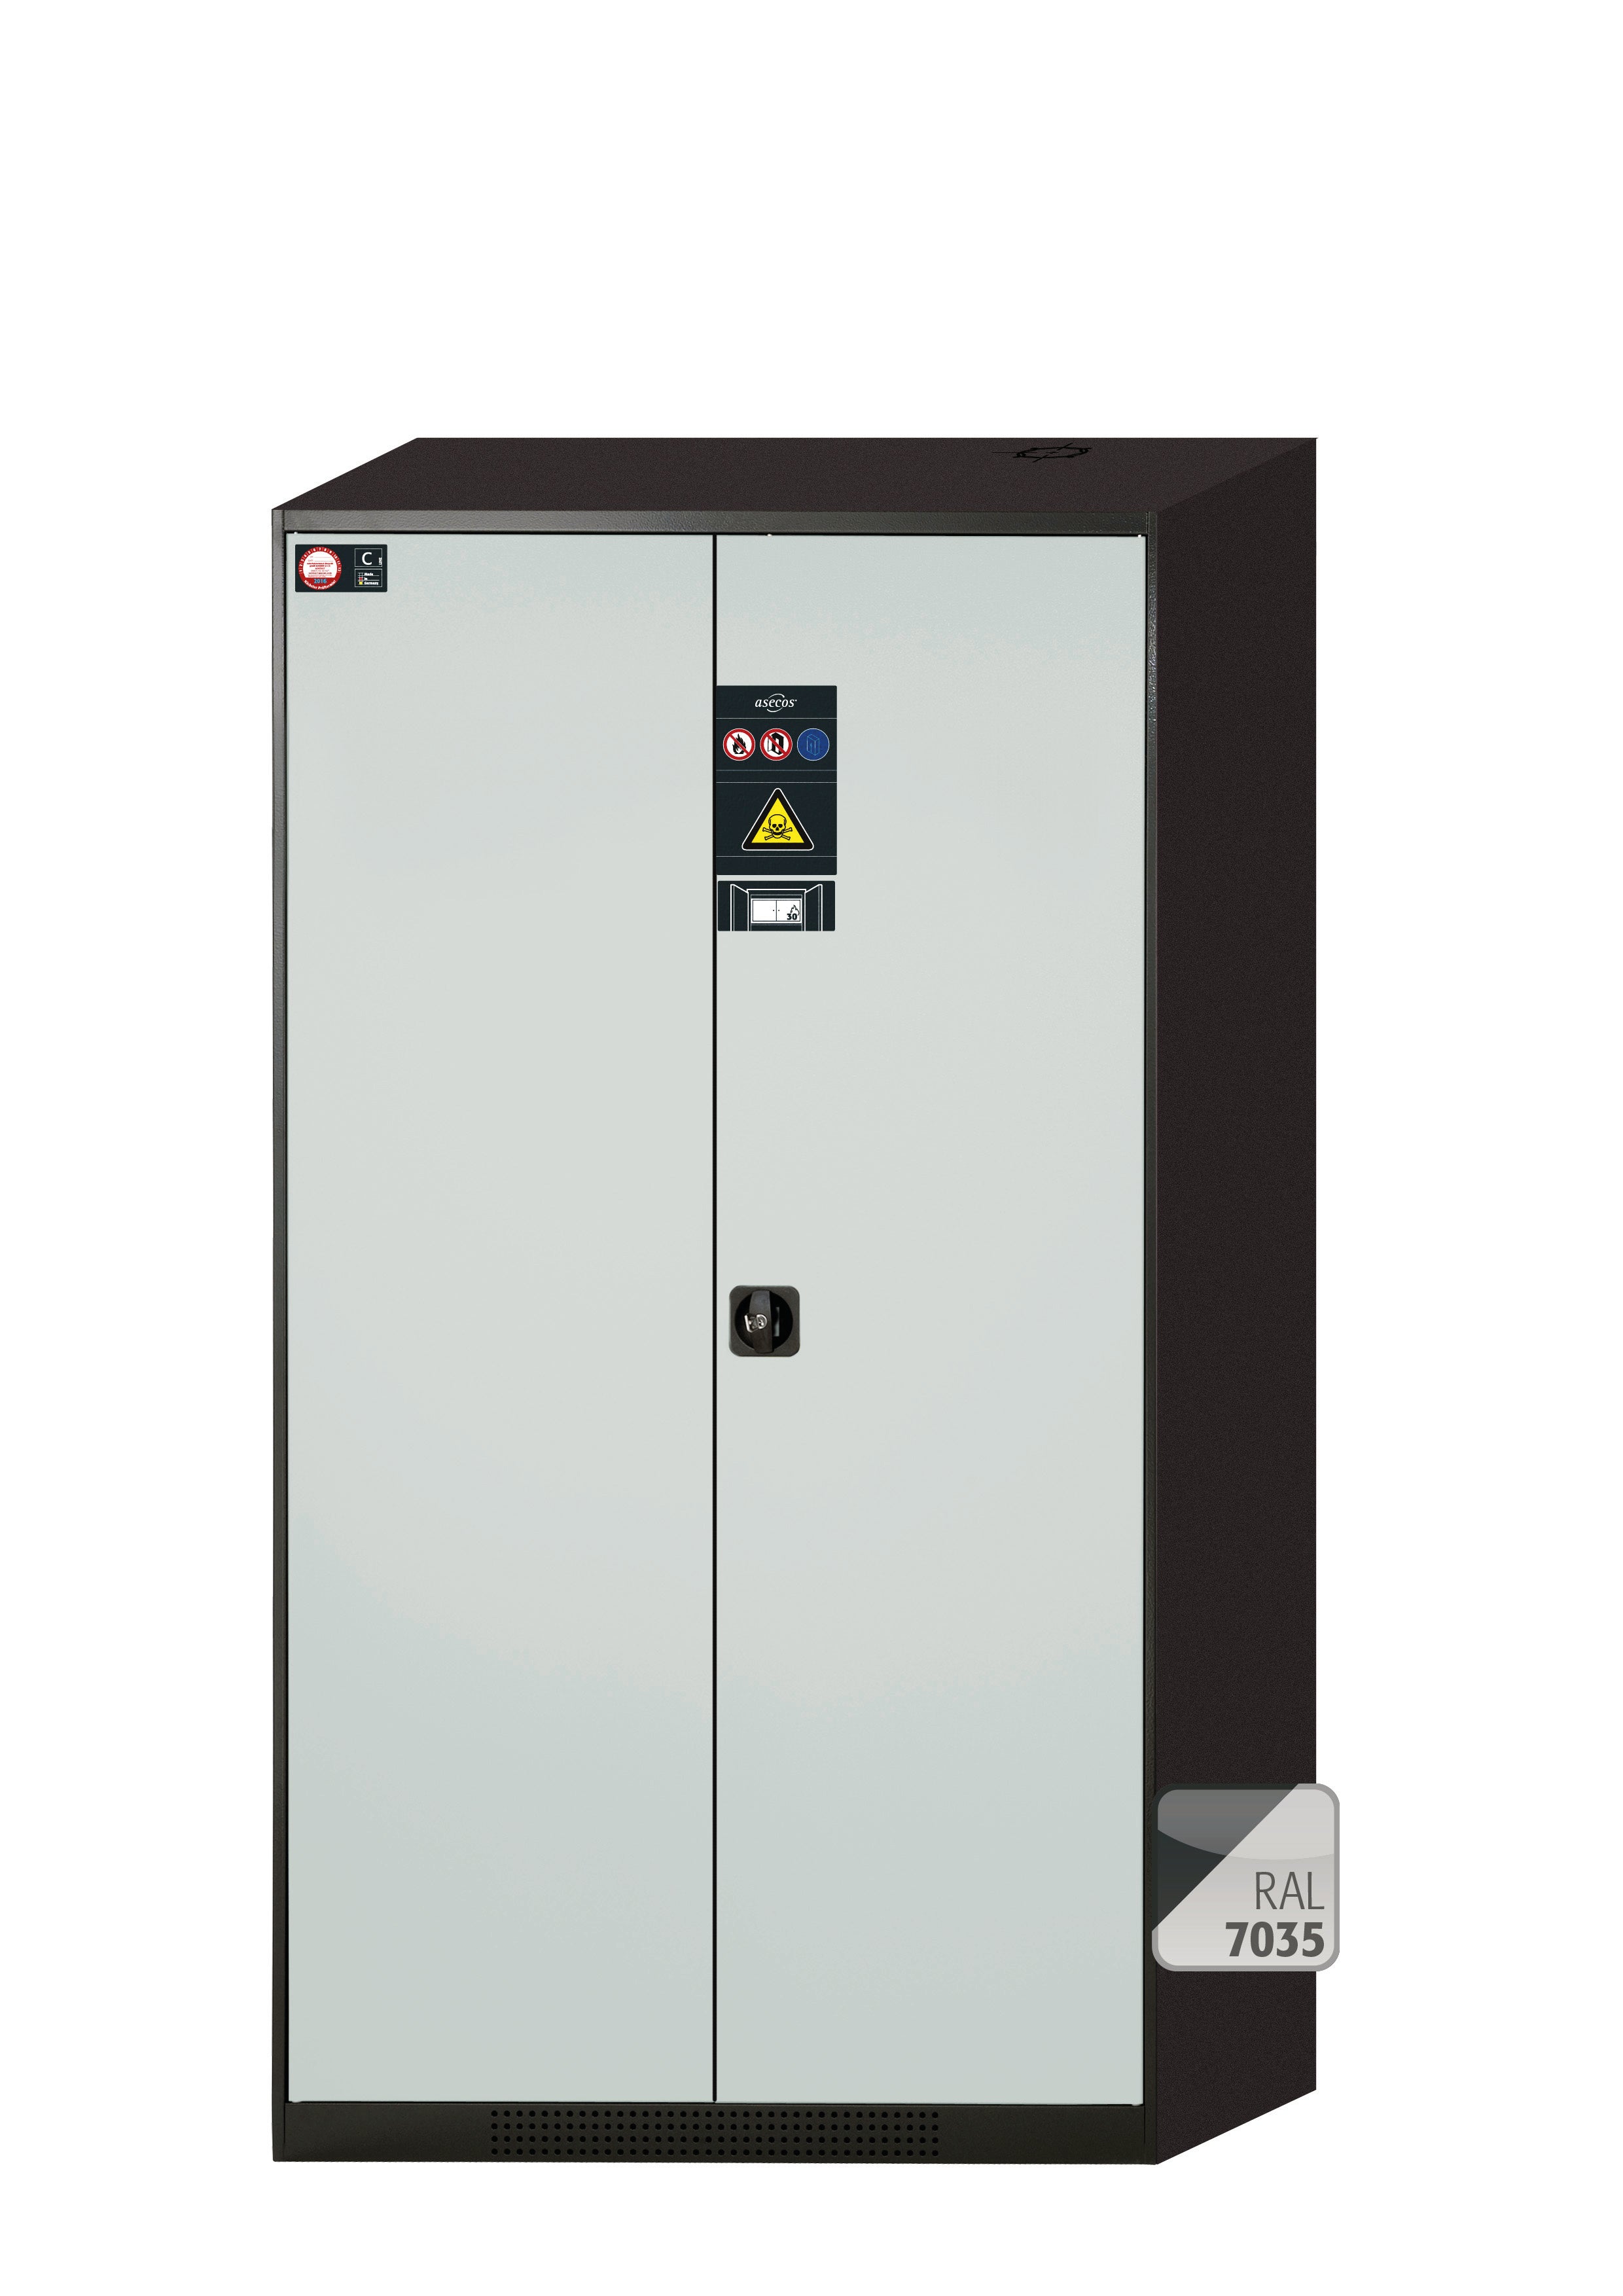 Chemical cabinet with type 30 safety box CS-CLASSIC-F model CS.195.105.F in light gray RAL 7035 with 2x standard shelves (sheet steel)